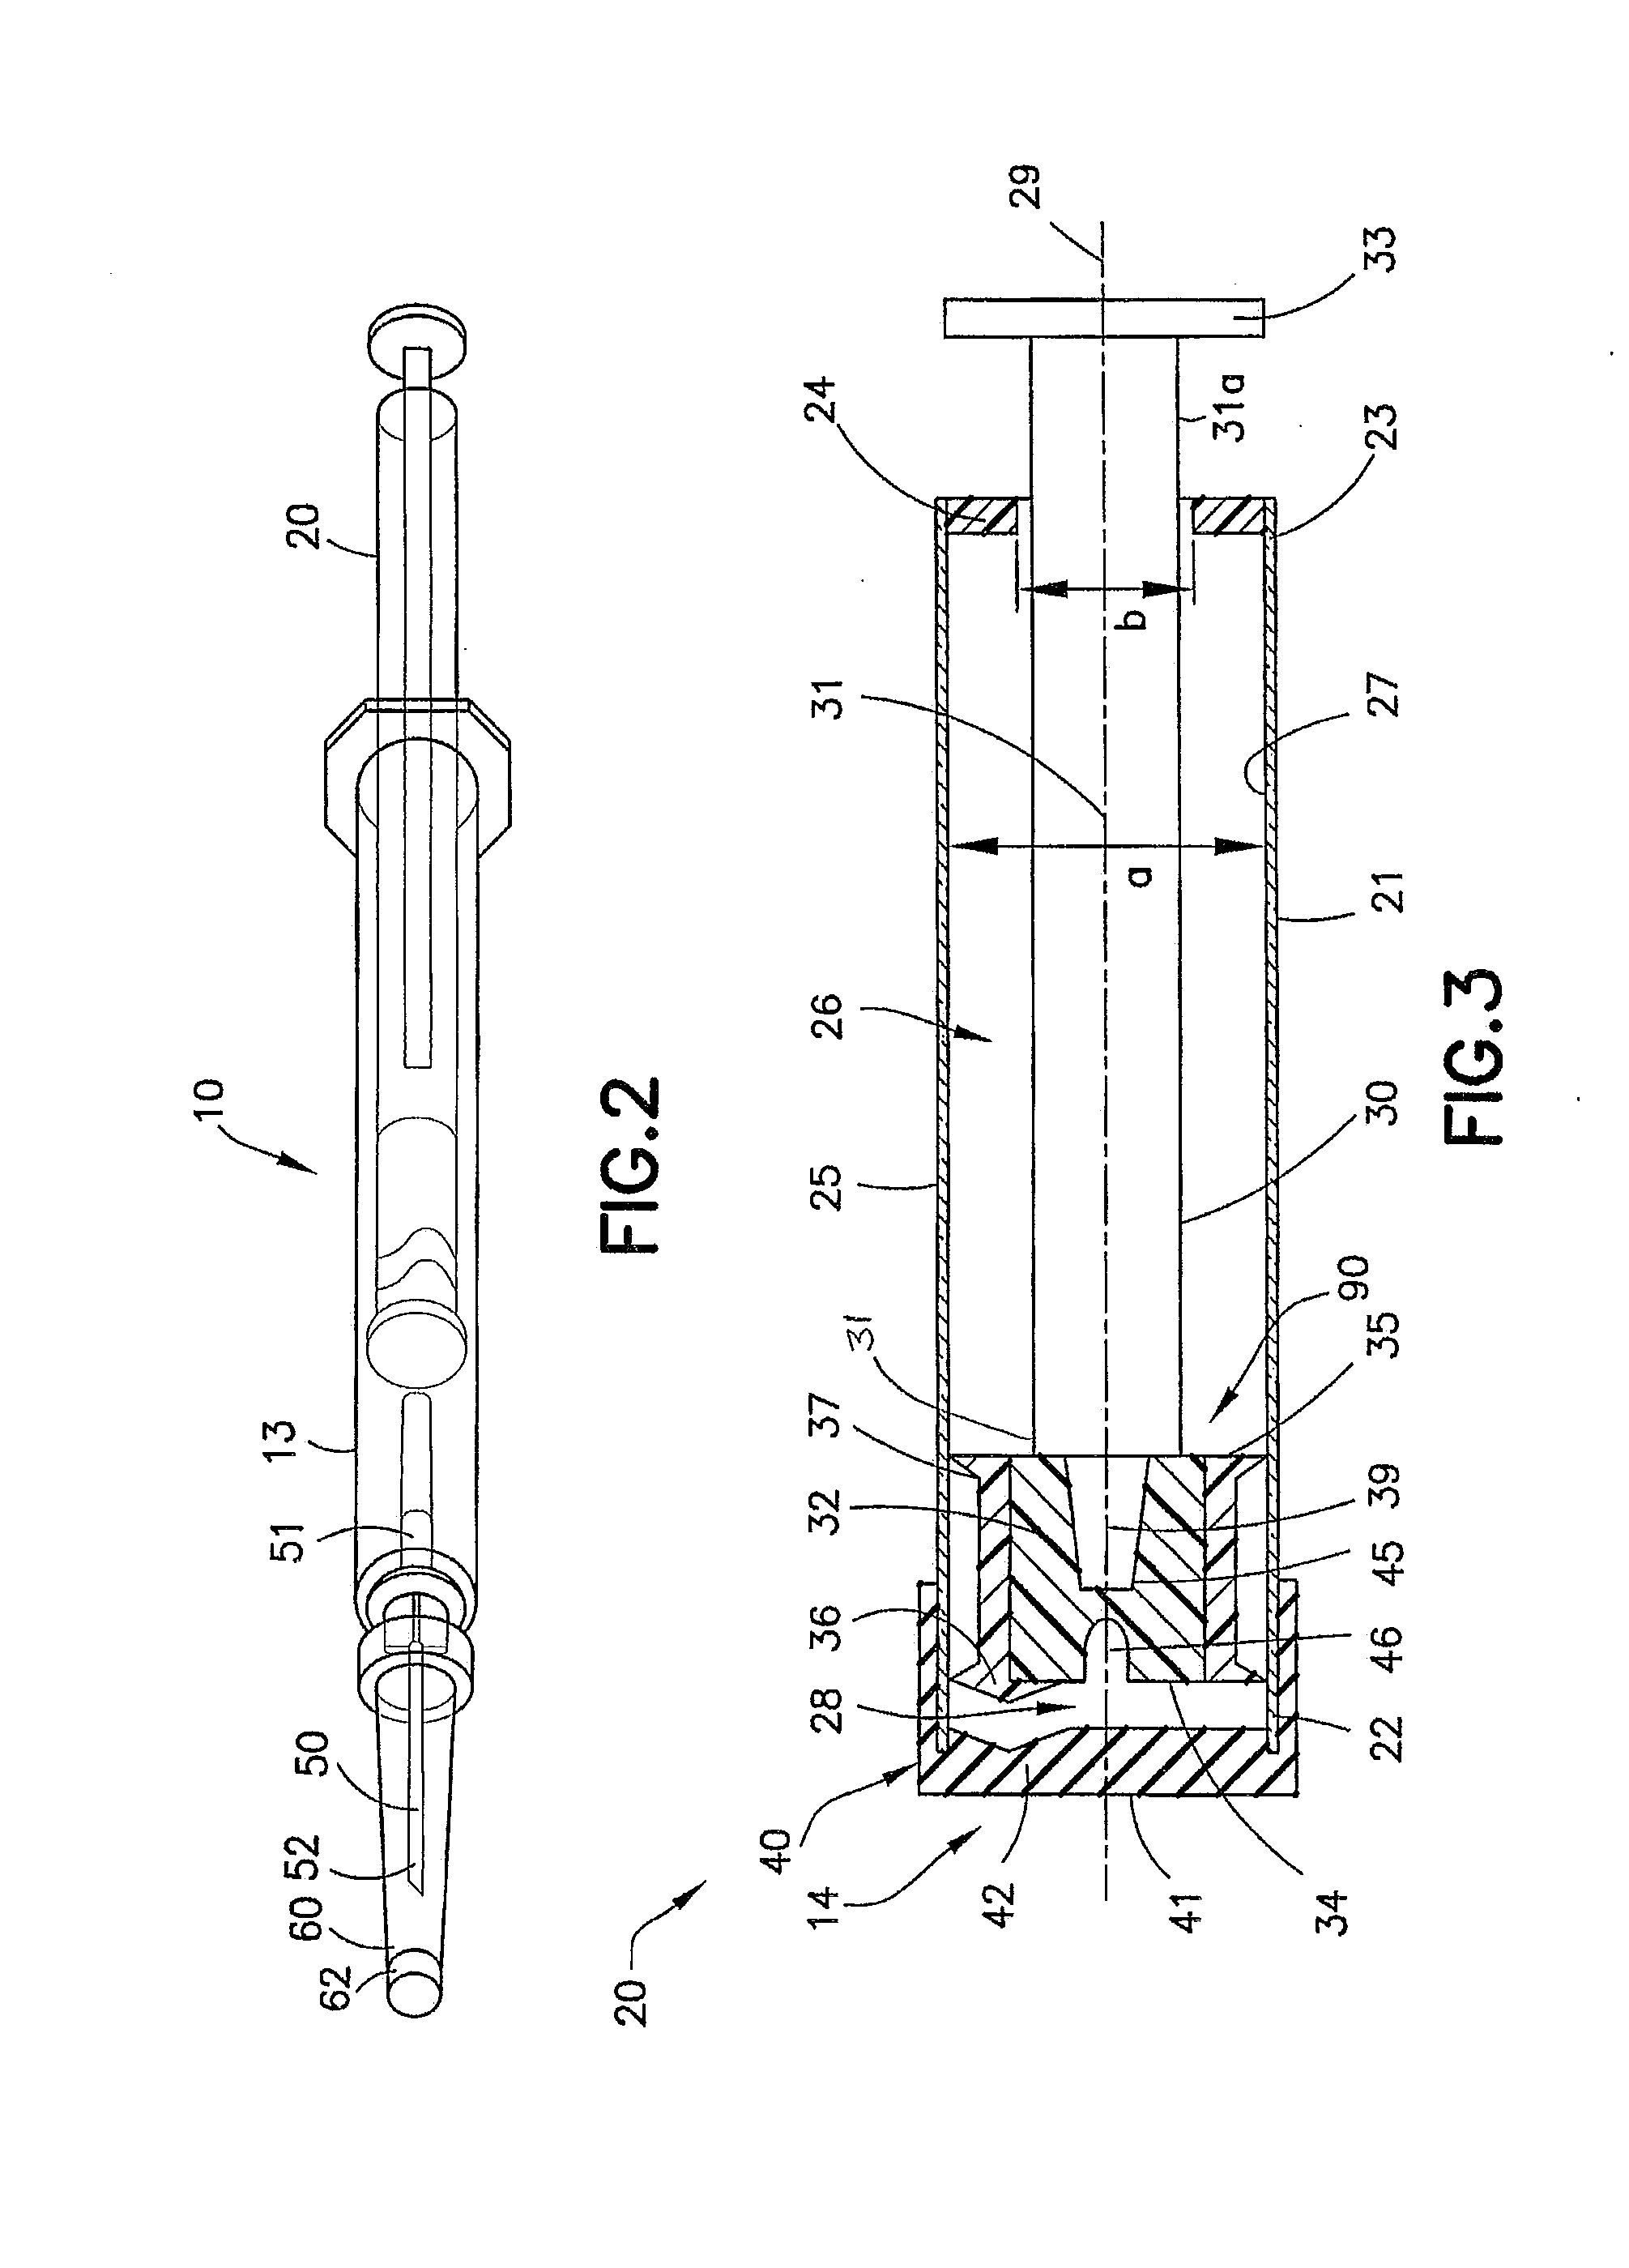 Syringe with Removable Plunger for Arterial Blood Gas Sample Collection